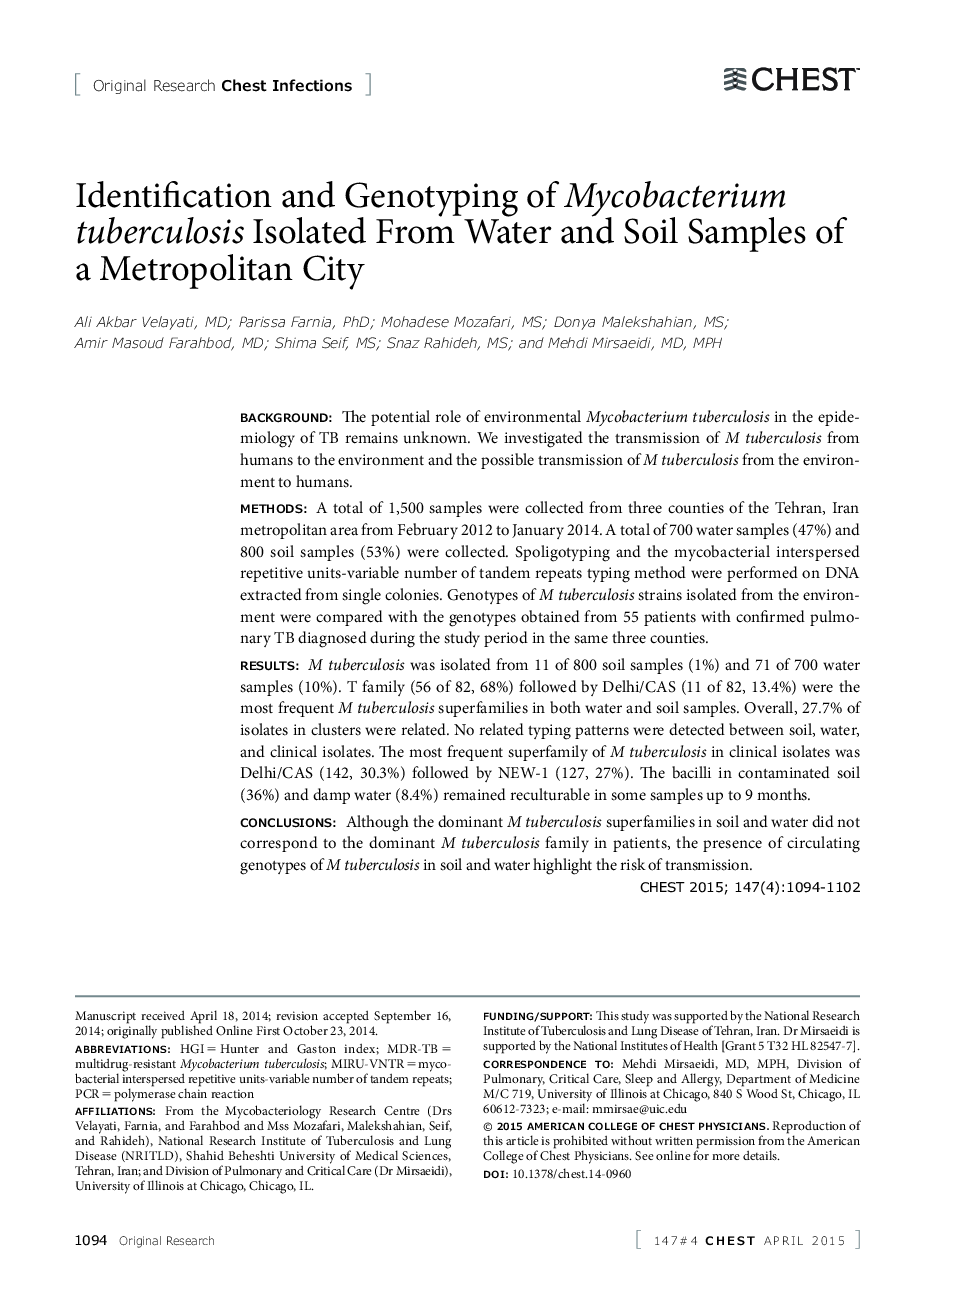 Identification and Genotyping of Mycobacterium tuberculosis Isolated From Water and Soil Samples of a Metropolitan City